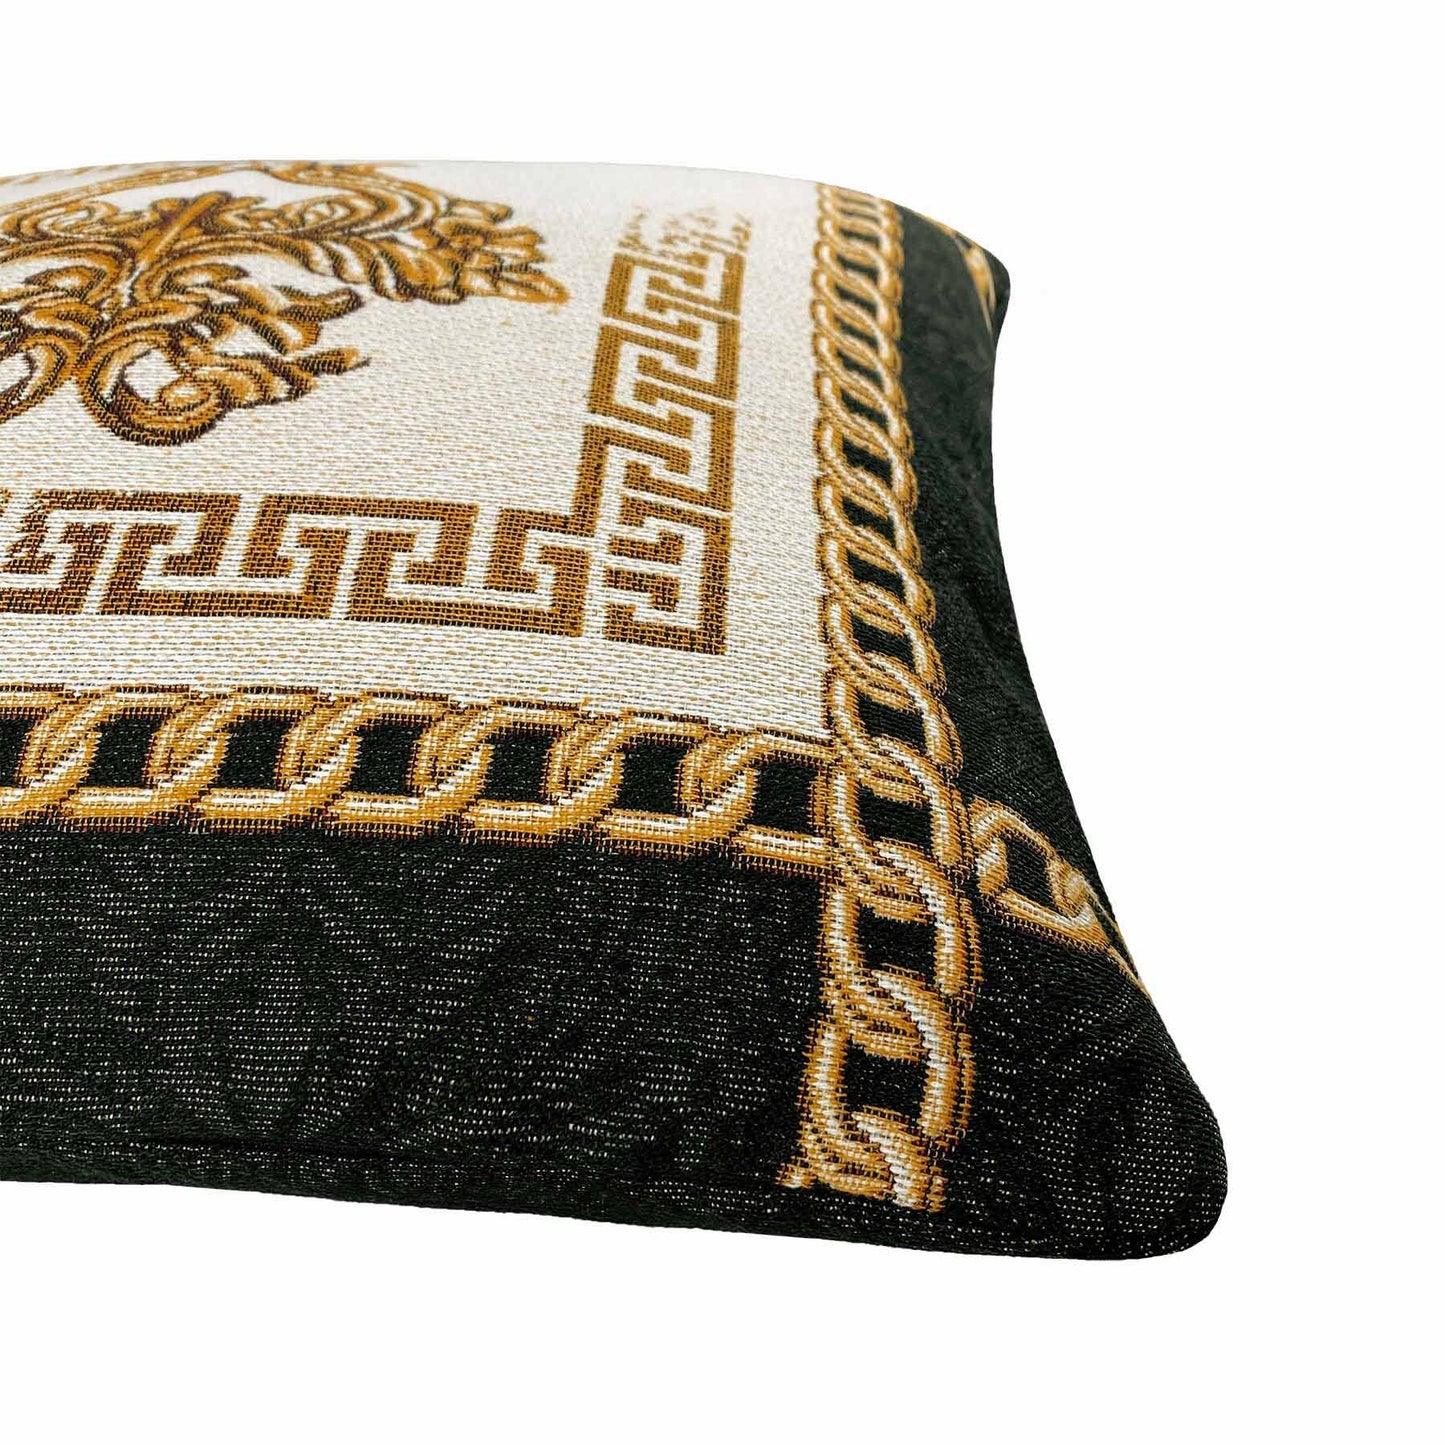 Baroque Style Tapestry Pillowcase With Golden Chains Pattern. White, Gold And Black Cotton Pillow Cover, Luxury Textile, Home Decor.